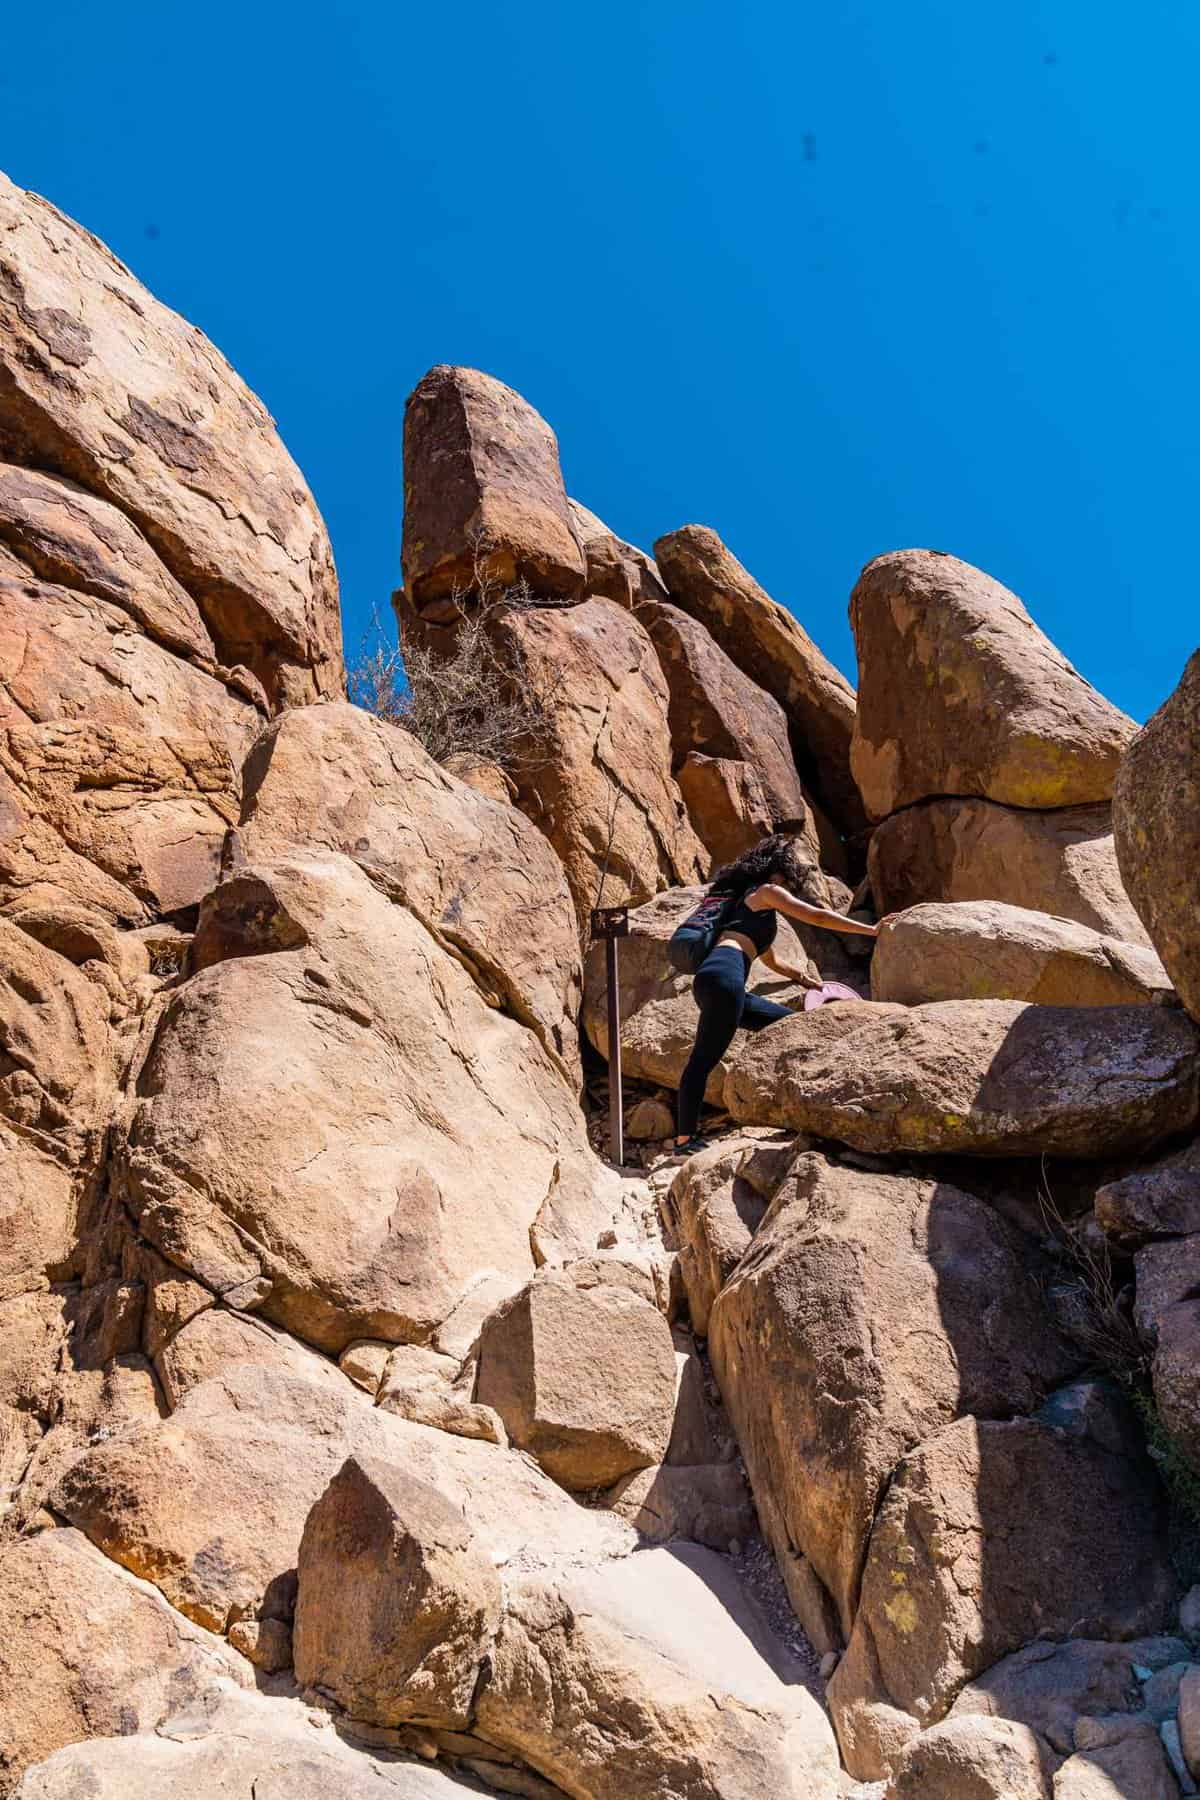 Jessica climbing the boulders on the way to the Balanced Rock formation in Big Bend